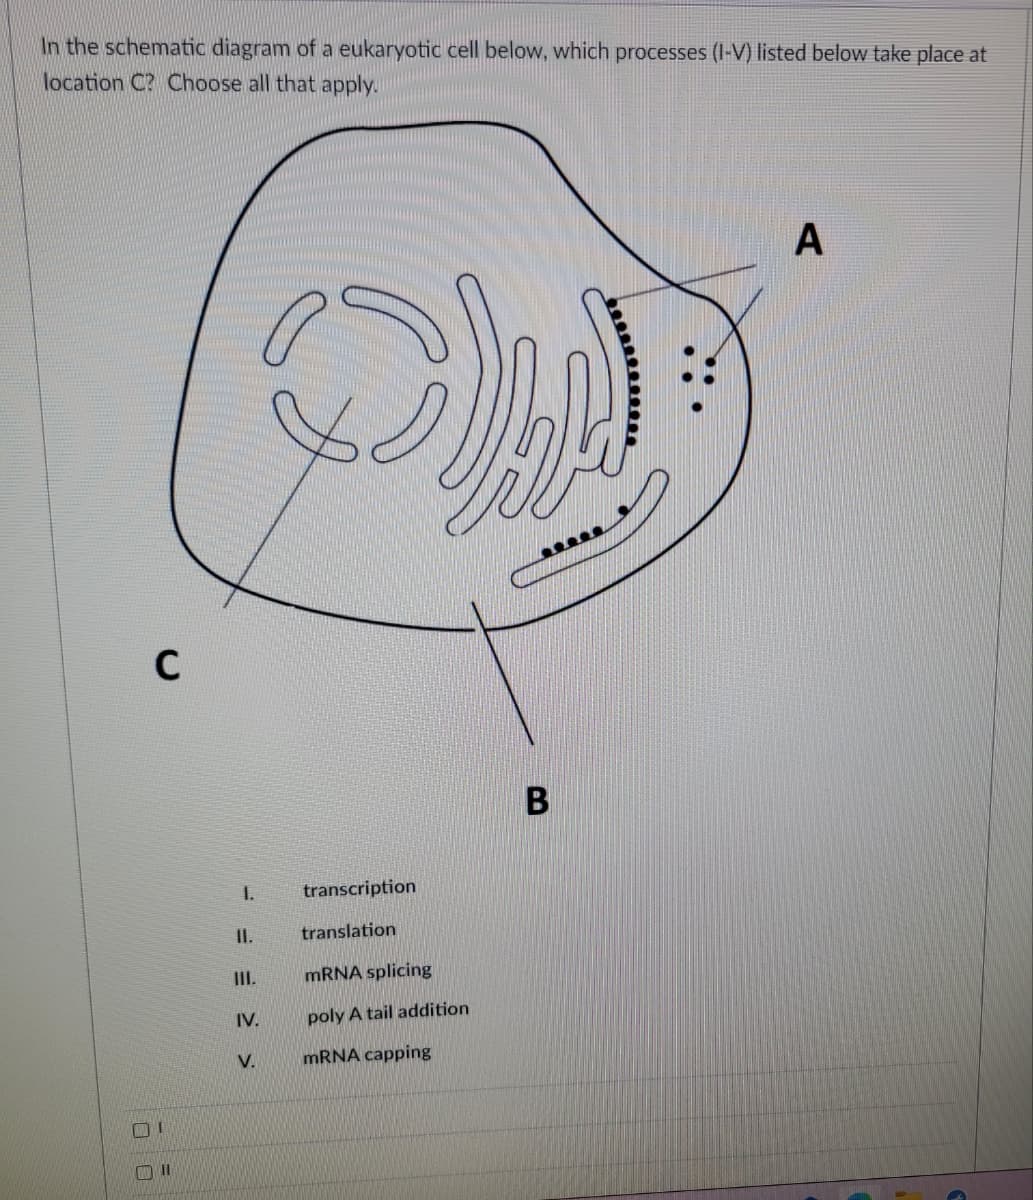 In the schematic diagram of a eukaryotic cell below, which processes (I-V) listed below take place at
location C? Choose all that apply.
C
00
1.
11.
III.
IV.
V.
transcription
translation
mRNA splicing
poly A tail addition
mRNA capping
B
A